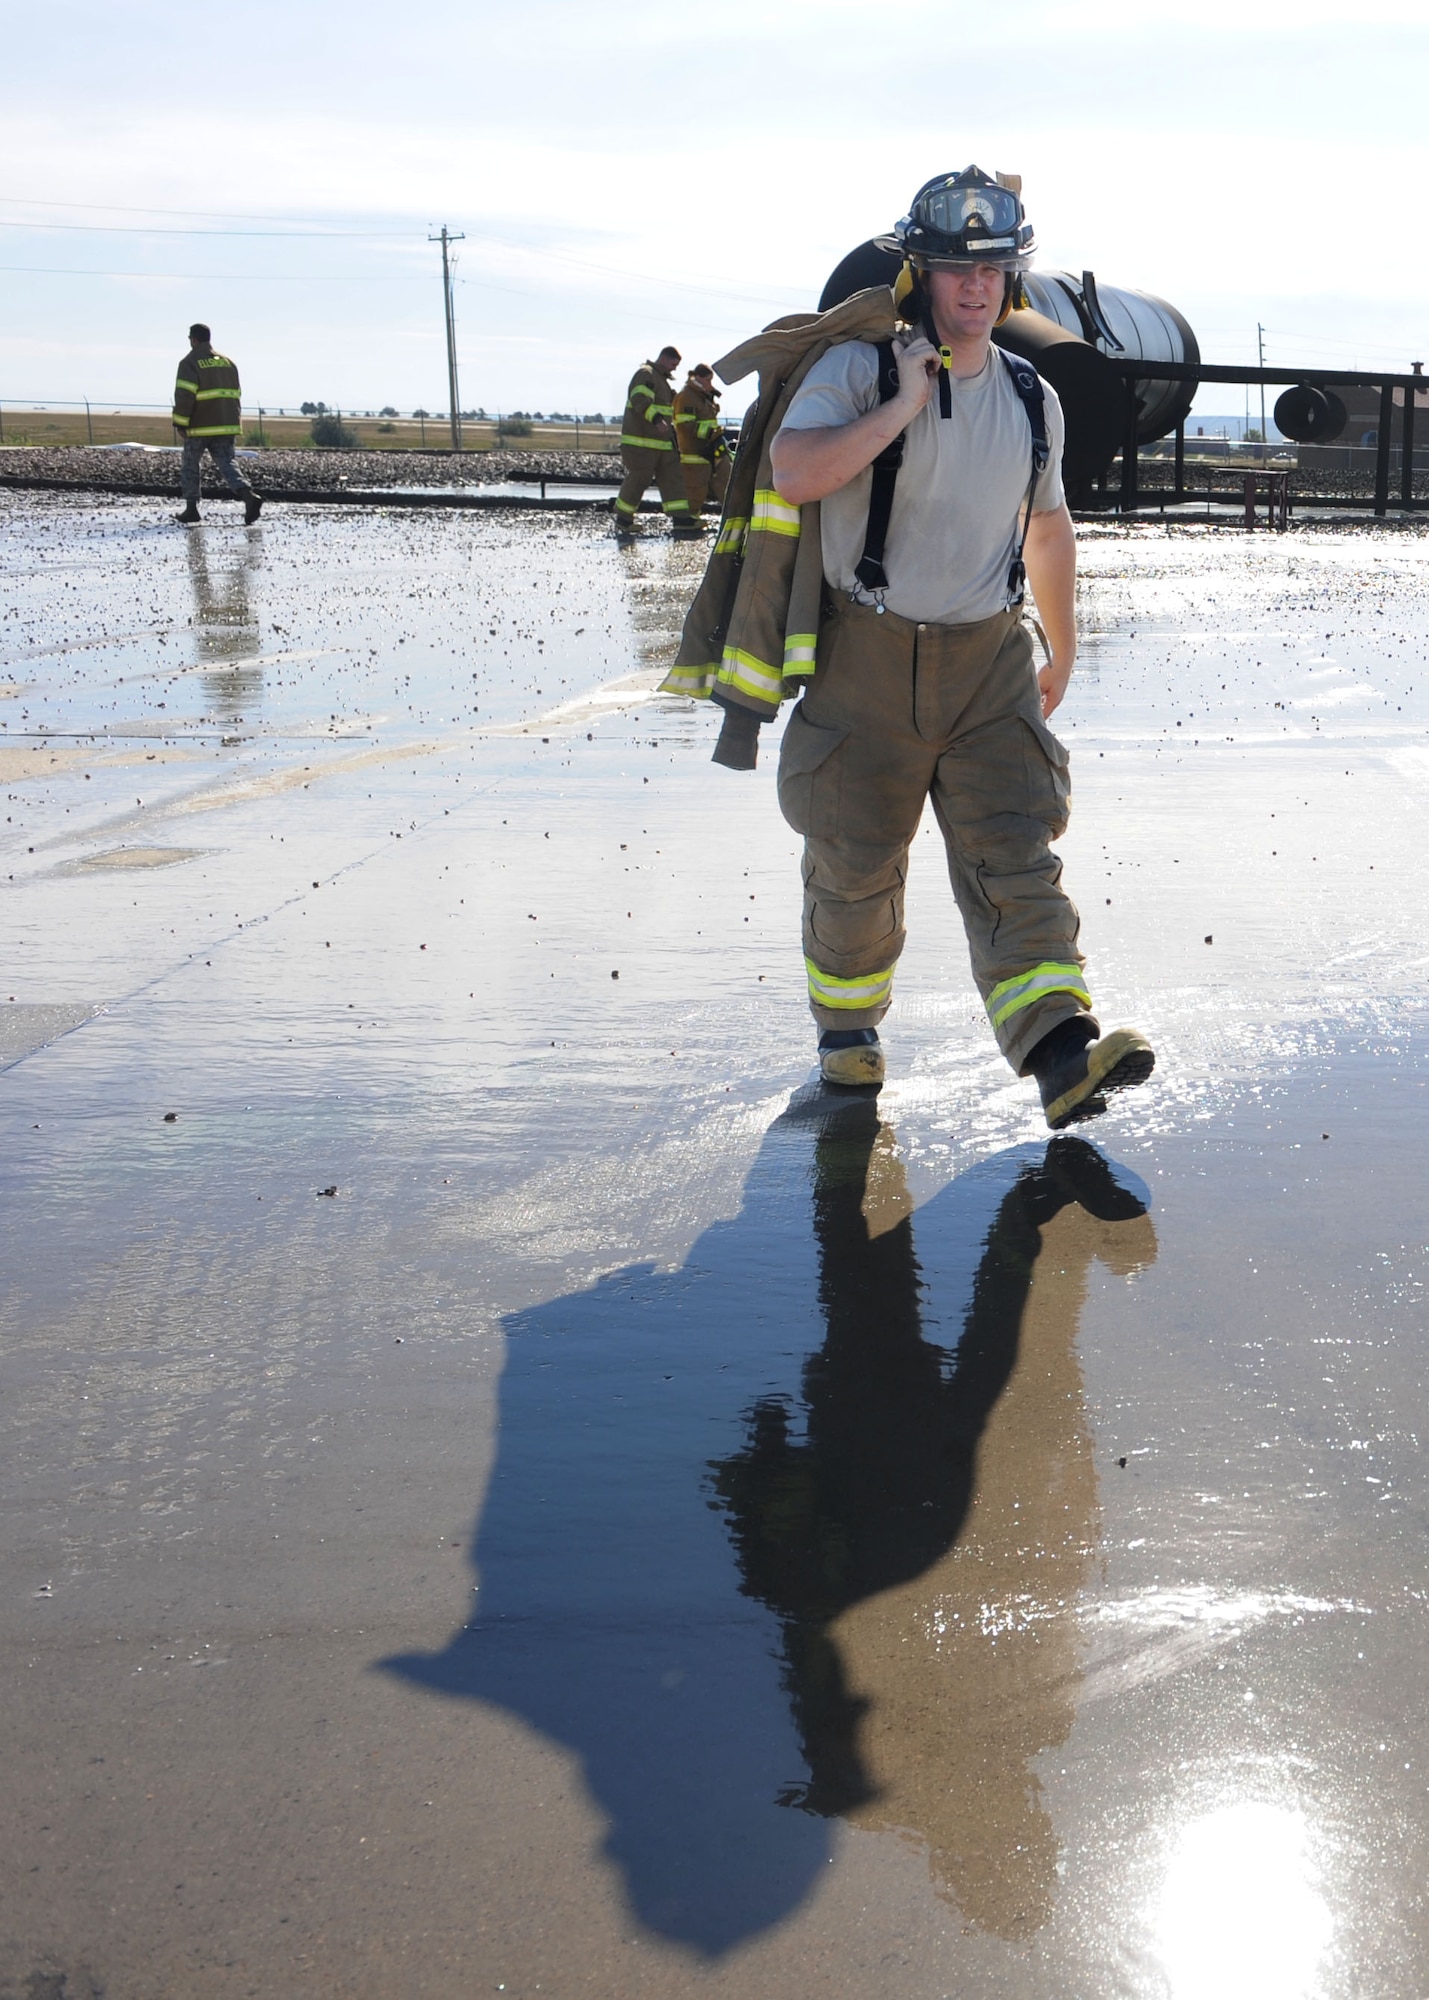 Senior Airman Clinton Gatewood, 28th Civil Engineer Squadron driver operator, walks back to a fire truck after participating in a pit burn training exercise at Ellsworth Air Force Base, S.D., Sept. 18, 2013. Fire pit training is conducted each quarter, ensuring all Airmen are proficient in performing their duties year-round. (U.S. Air Force photo by Airman 1st Class Rebecca Imwalle / Released)